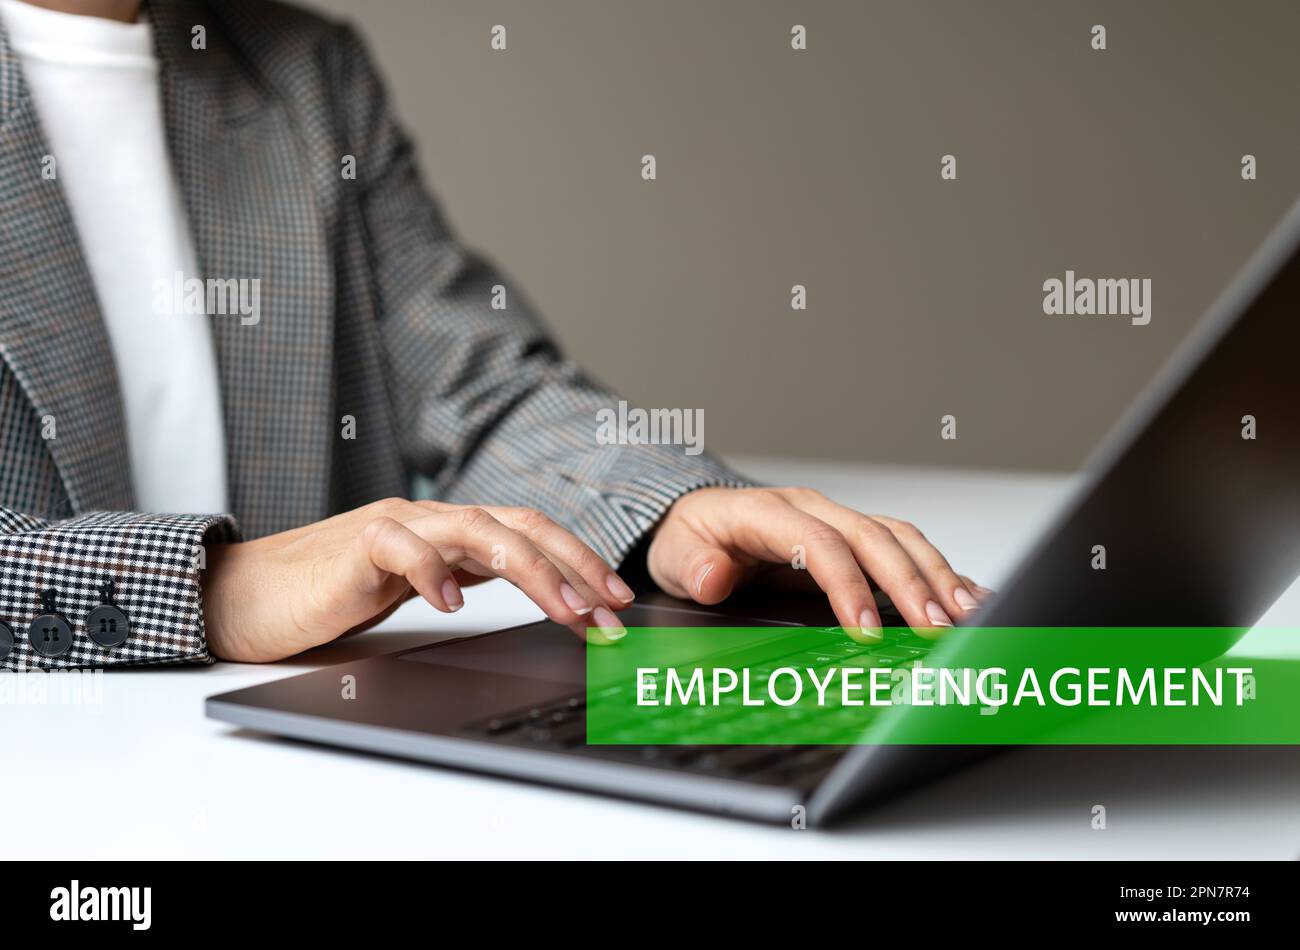 Human resource manager using laptop, text Employee Engagement. Stock Photo